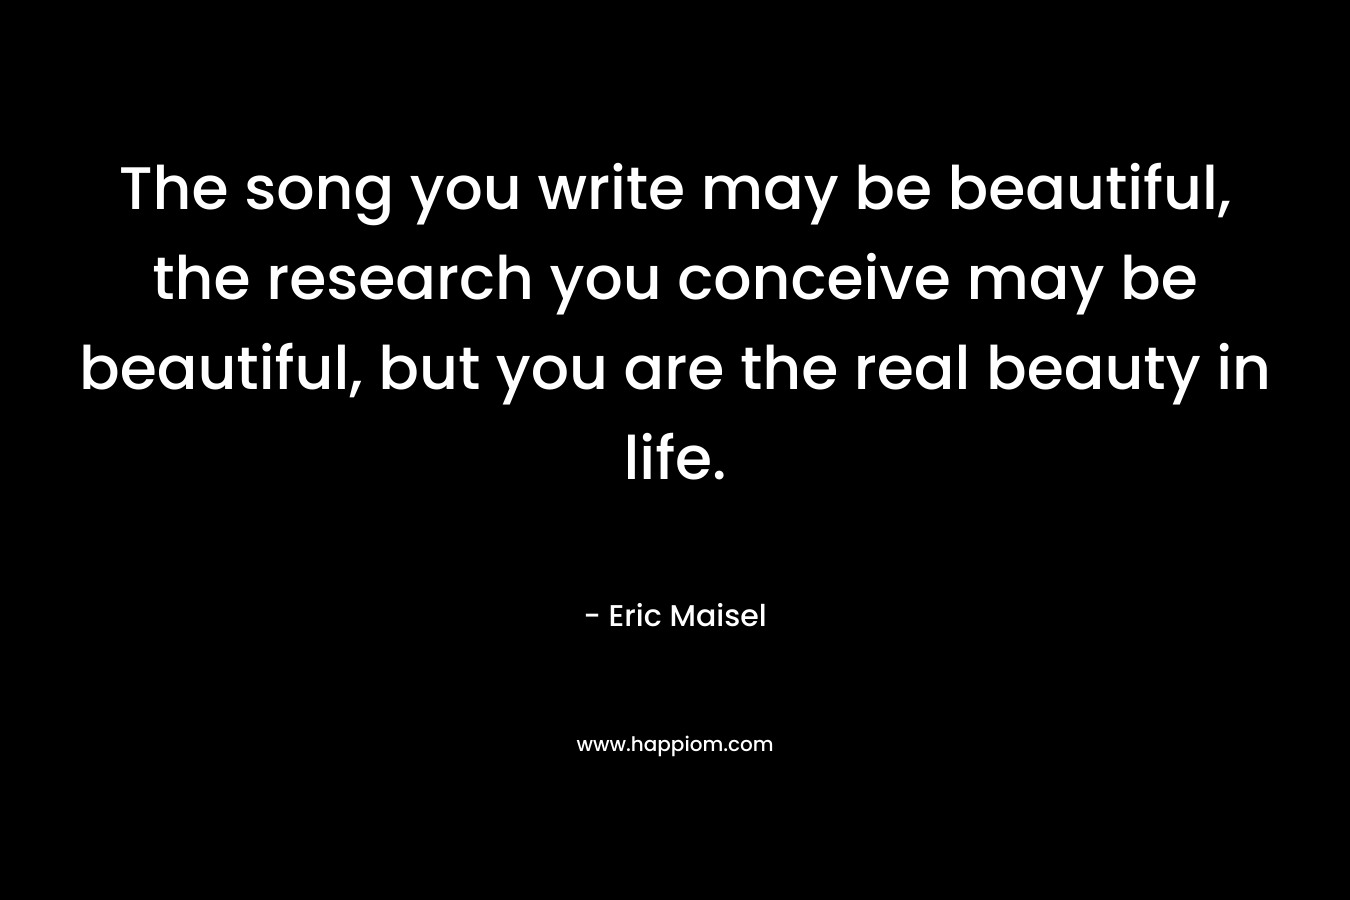 The song you write may be beautiful, the research you conceive may be beautiful, but you are the real beauty in life.